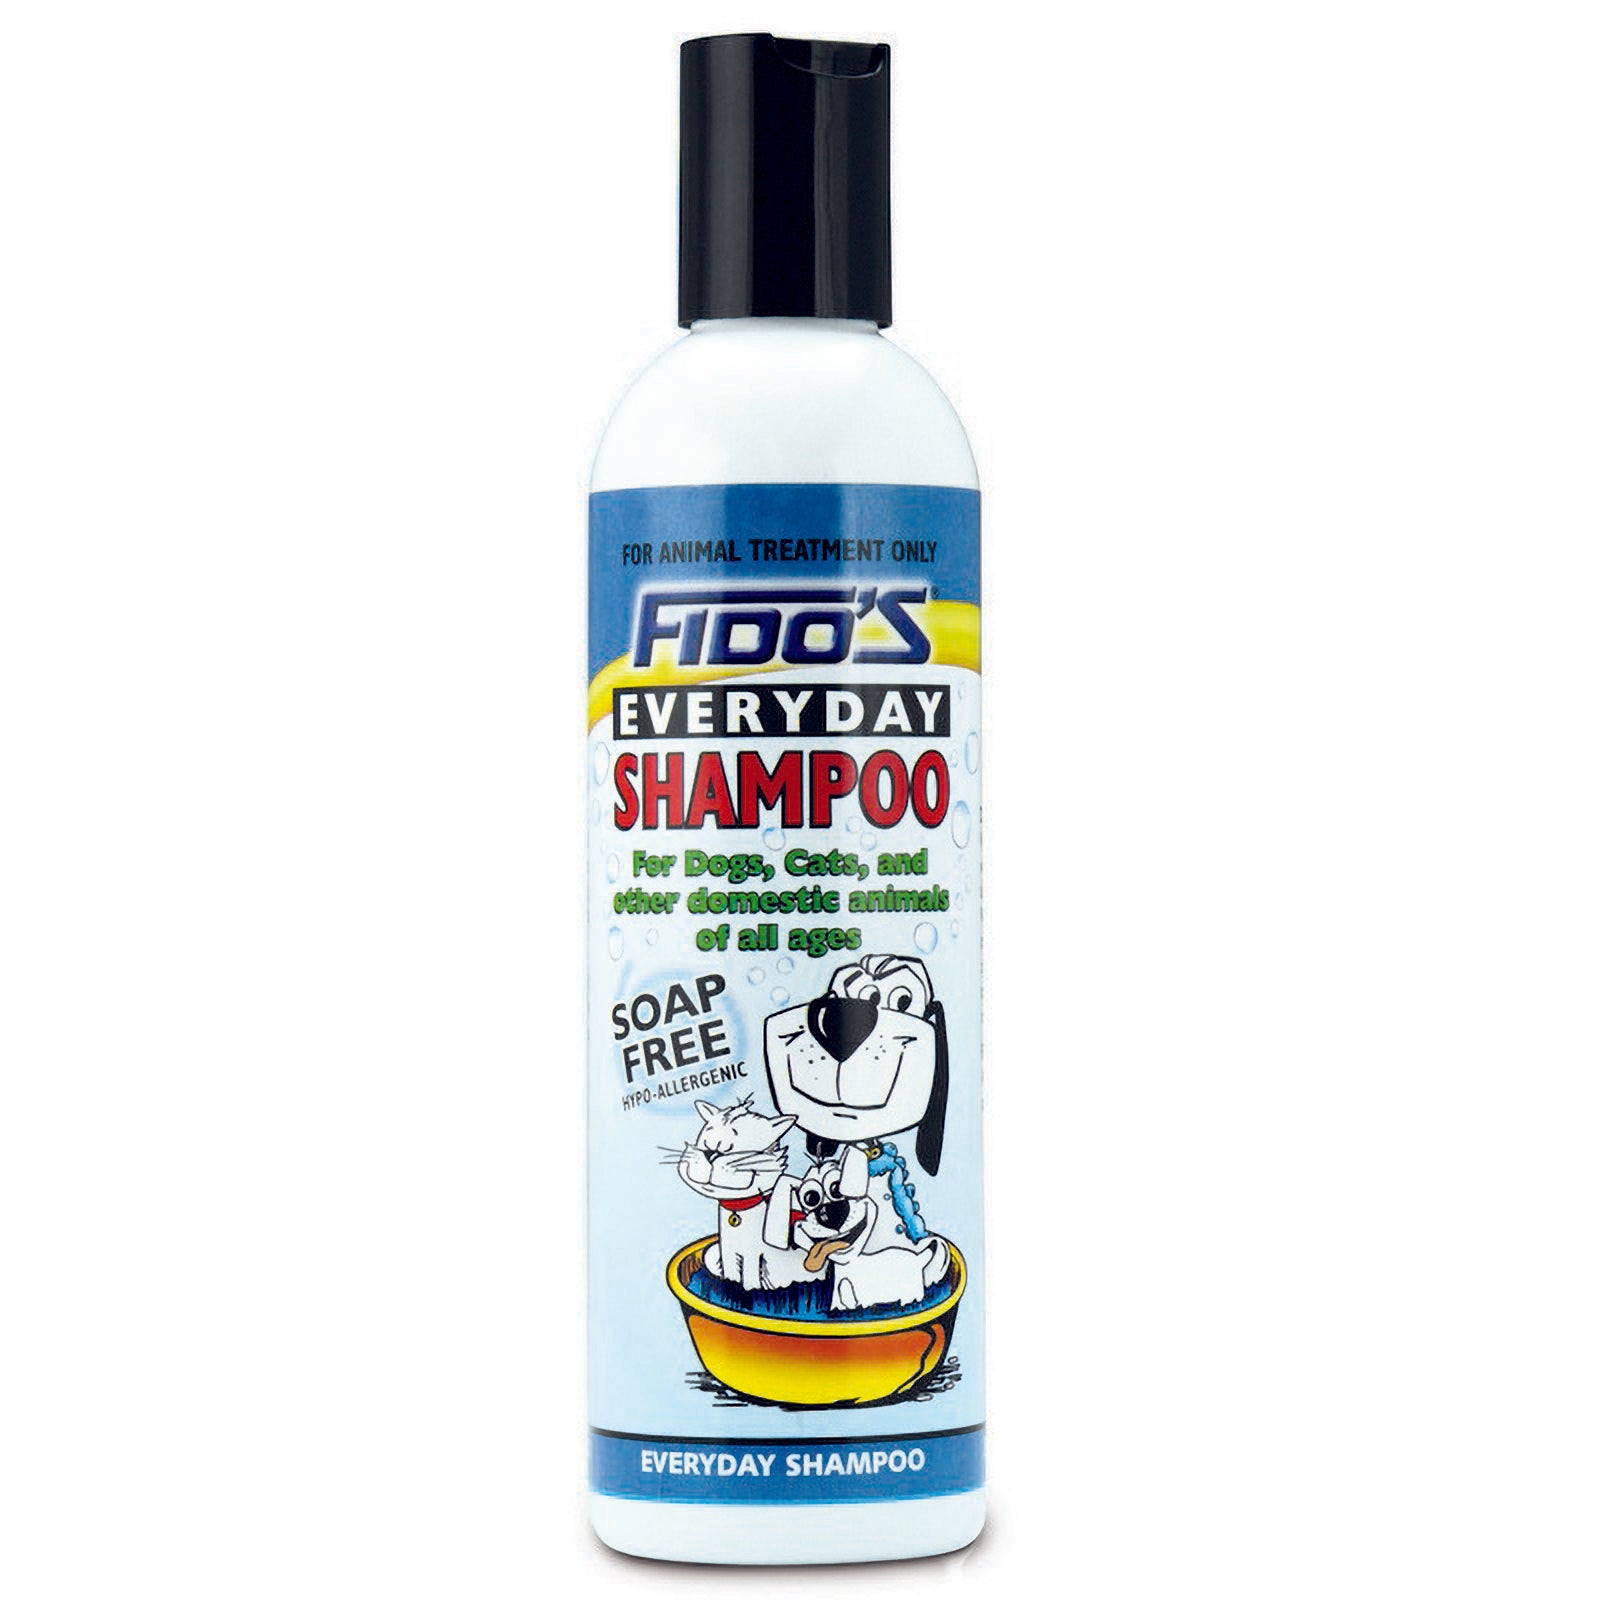 Fido's Everyday Shampoo for Dogs & Cats